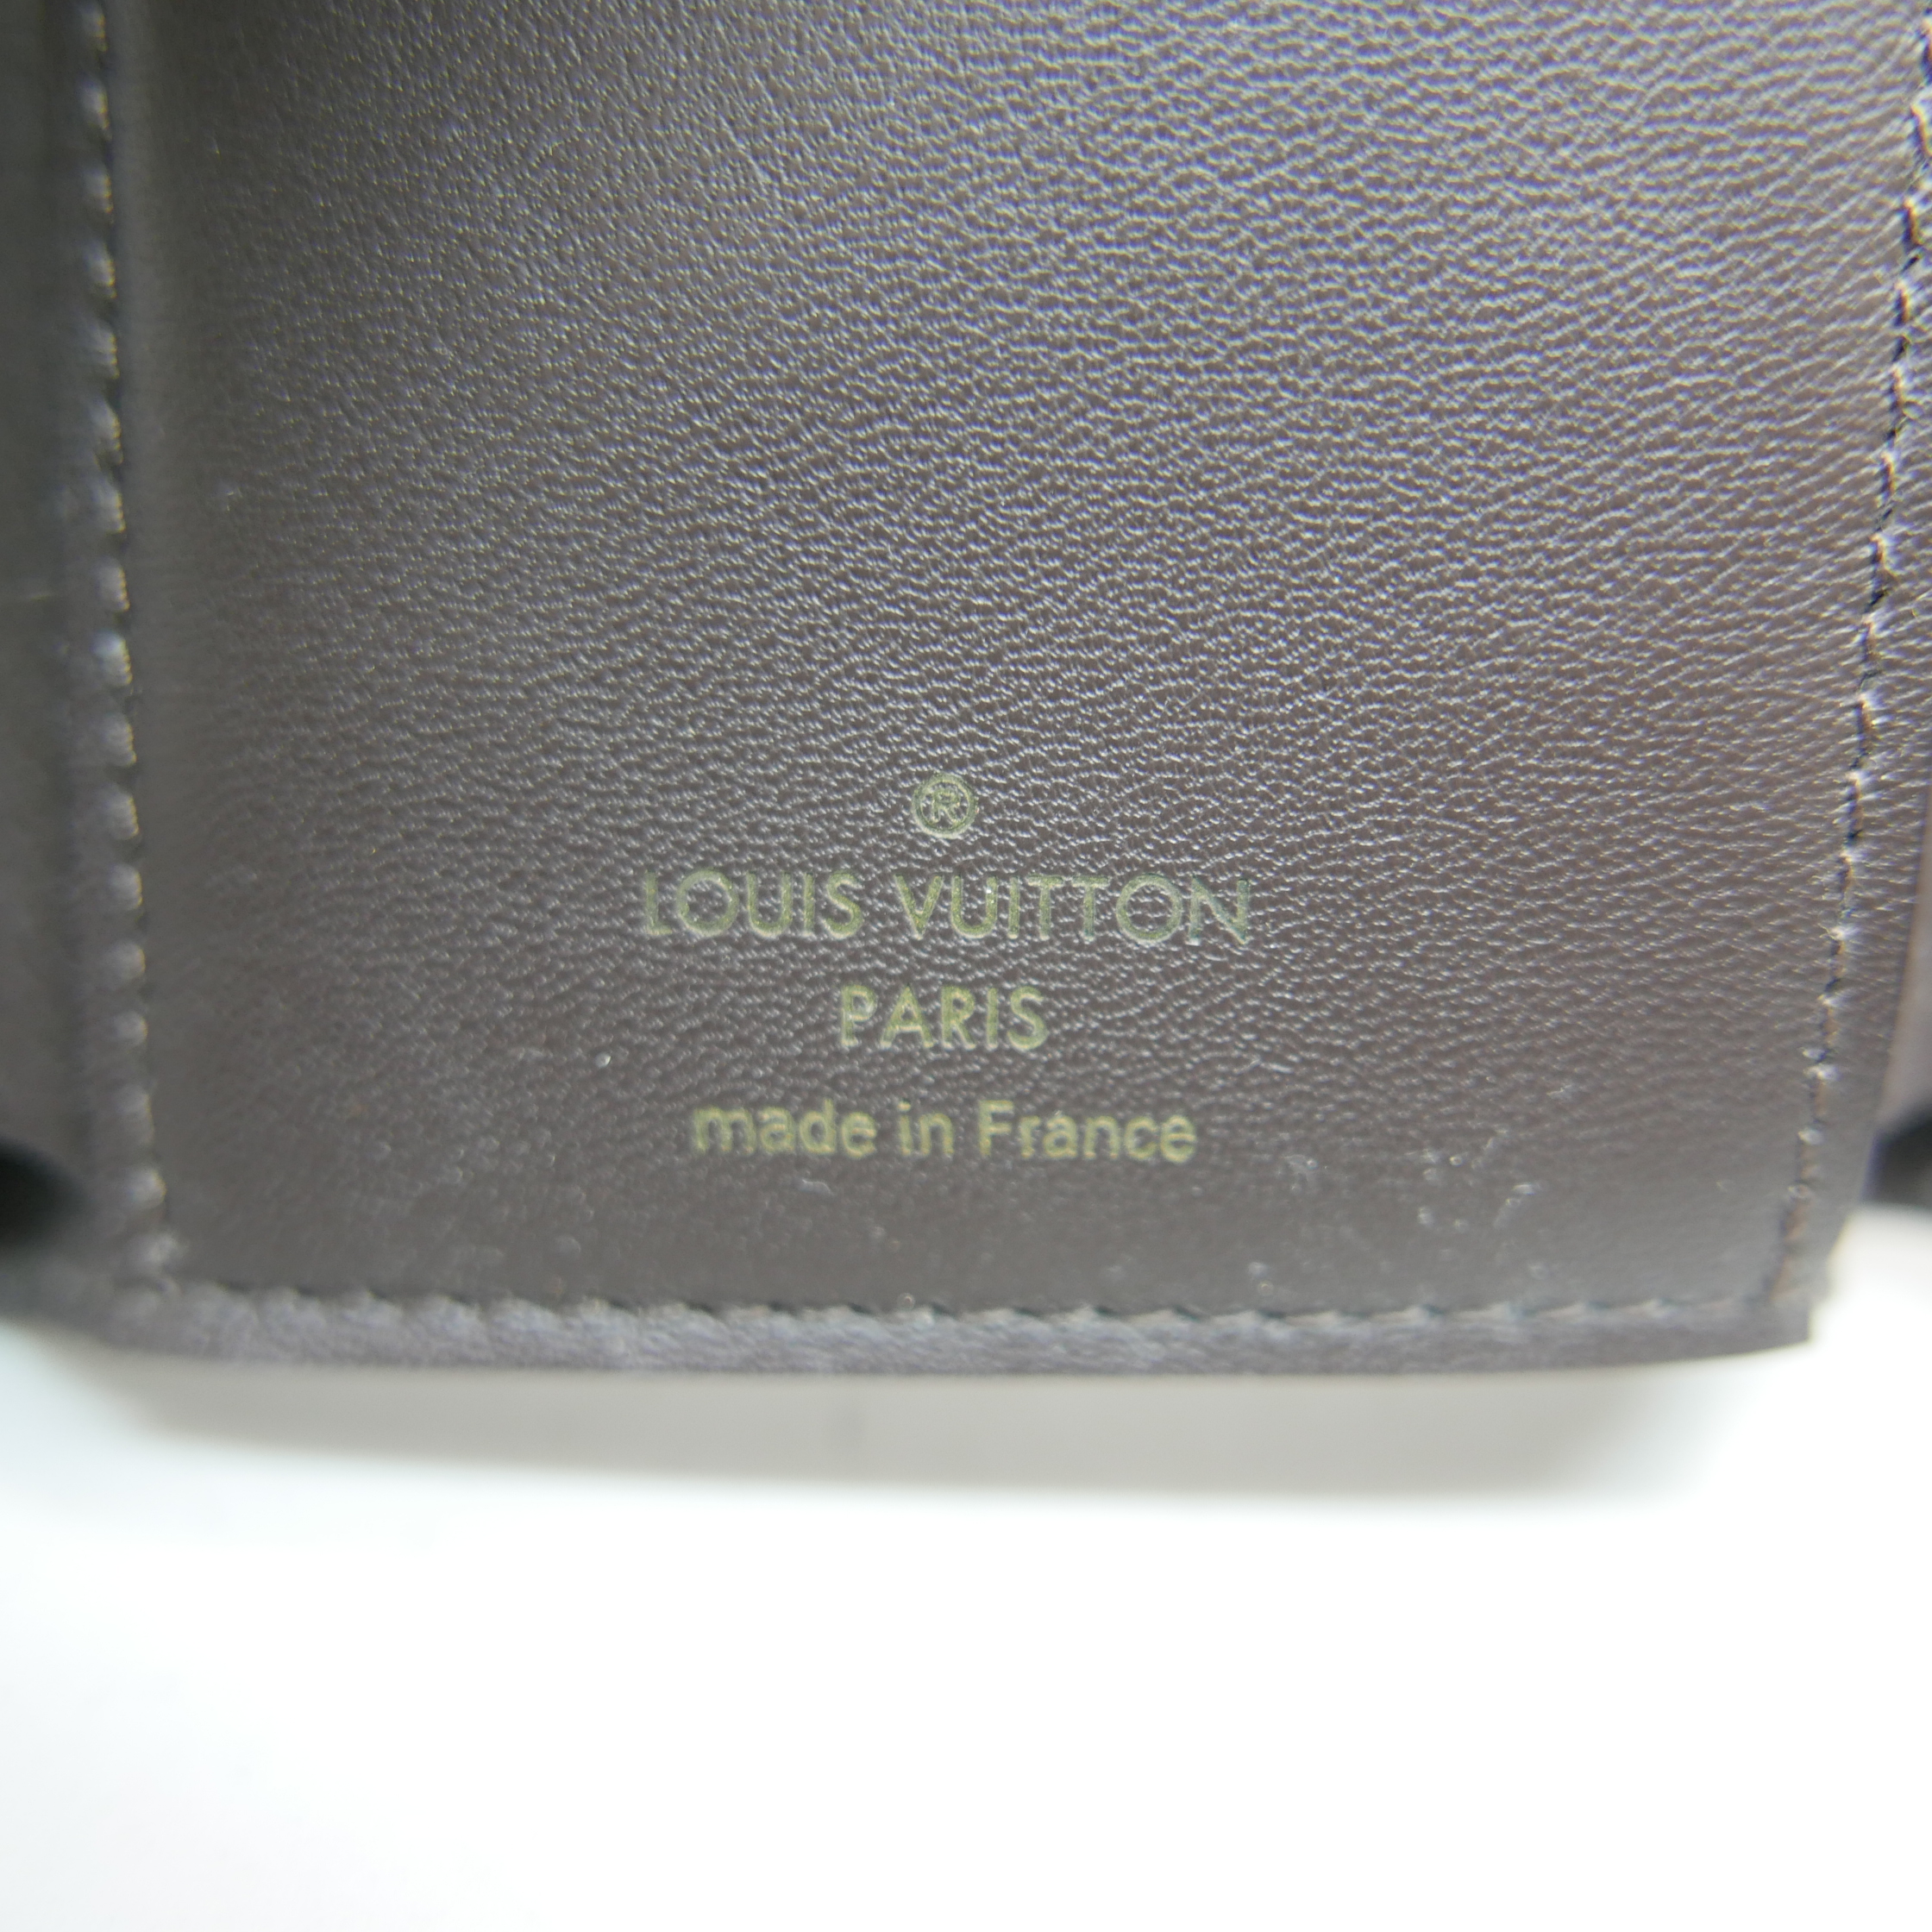 A lady's Louis Vuitton purse, boxed - Image 3 of 4